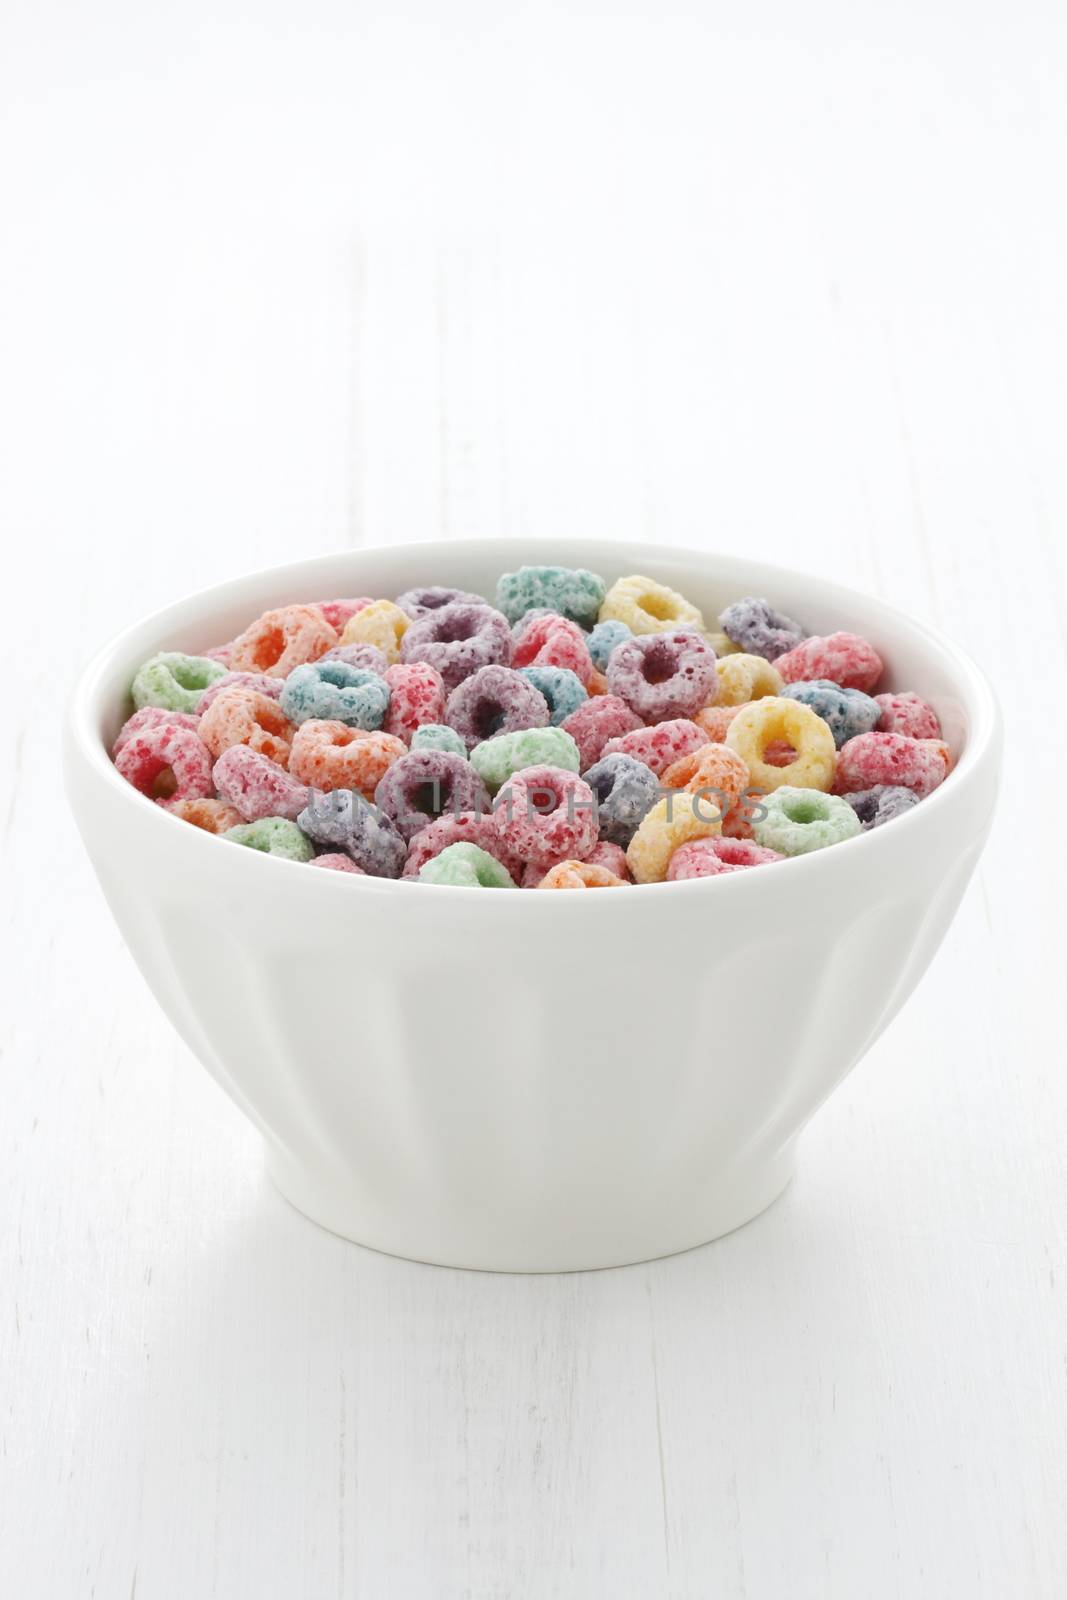 Delicious kids cereal loops with a fruit flavor by tacar